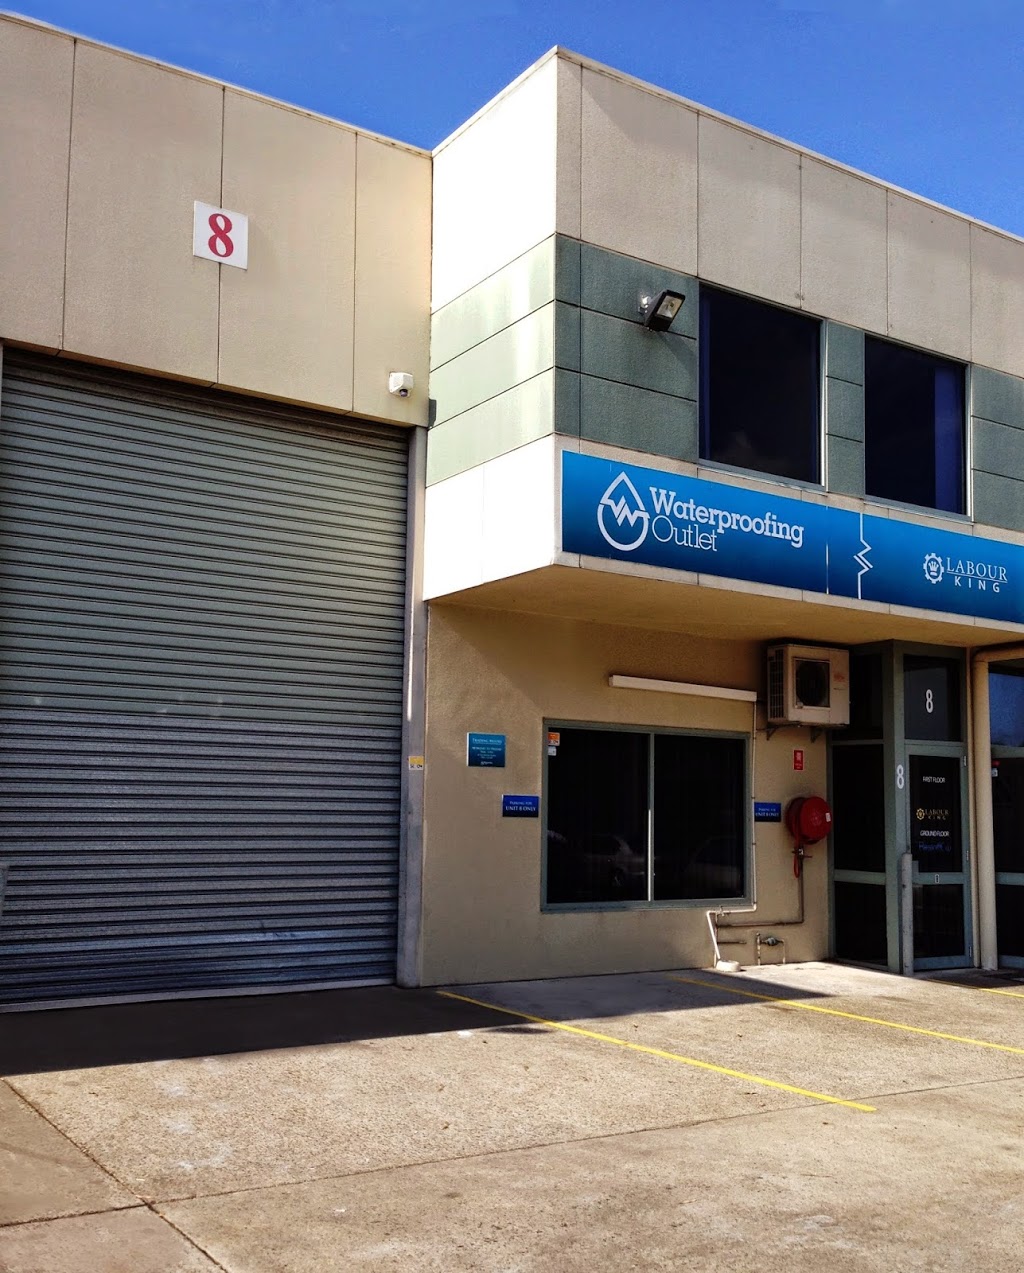 Waterproofing Outlet | store | 8/2A Burrows Rd, St Peters NSW 2044, Australia | 0295502811 OR +61 2 9550 2811